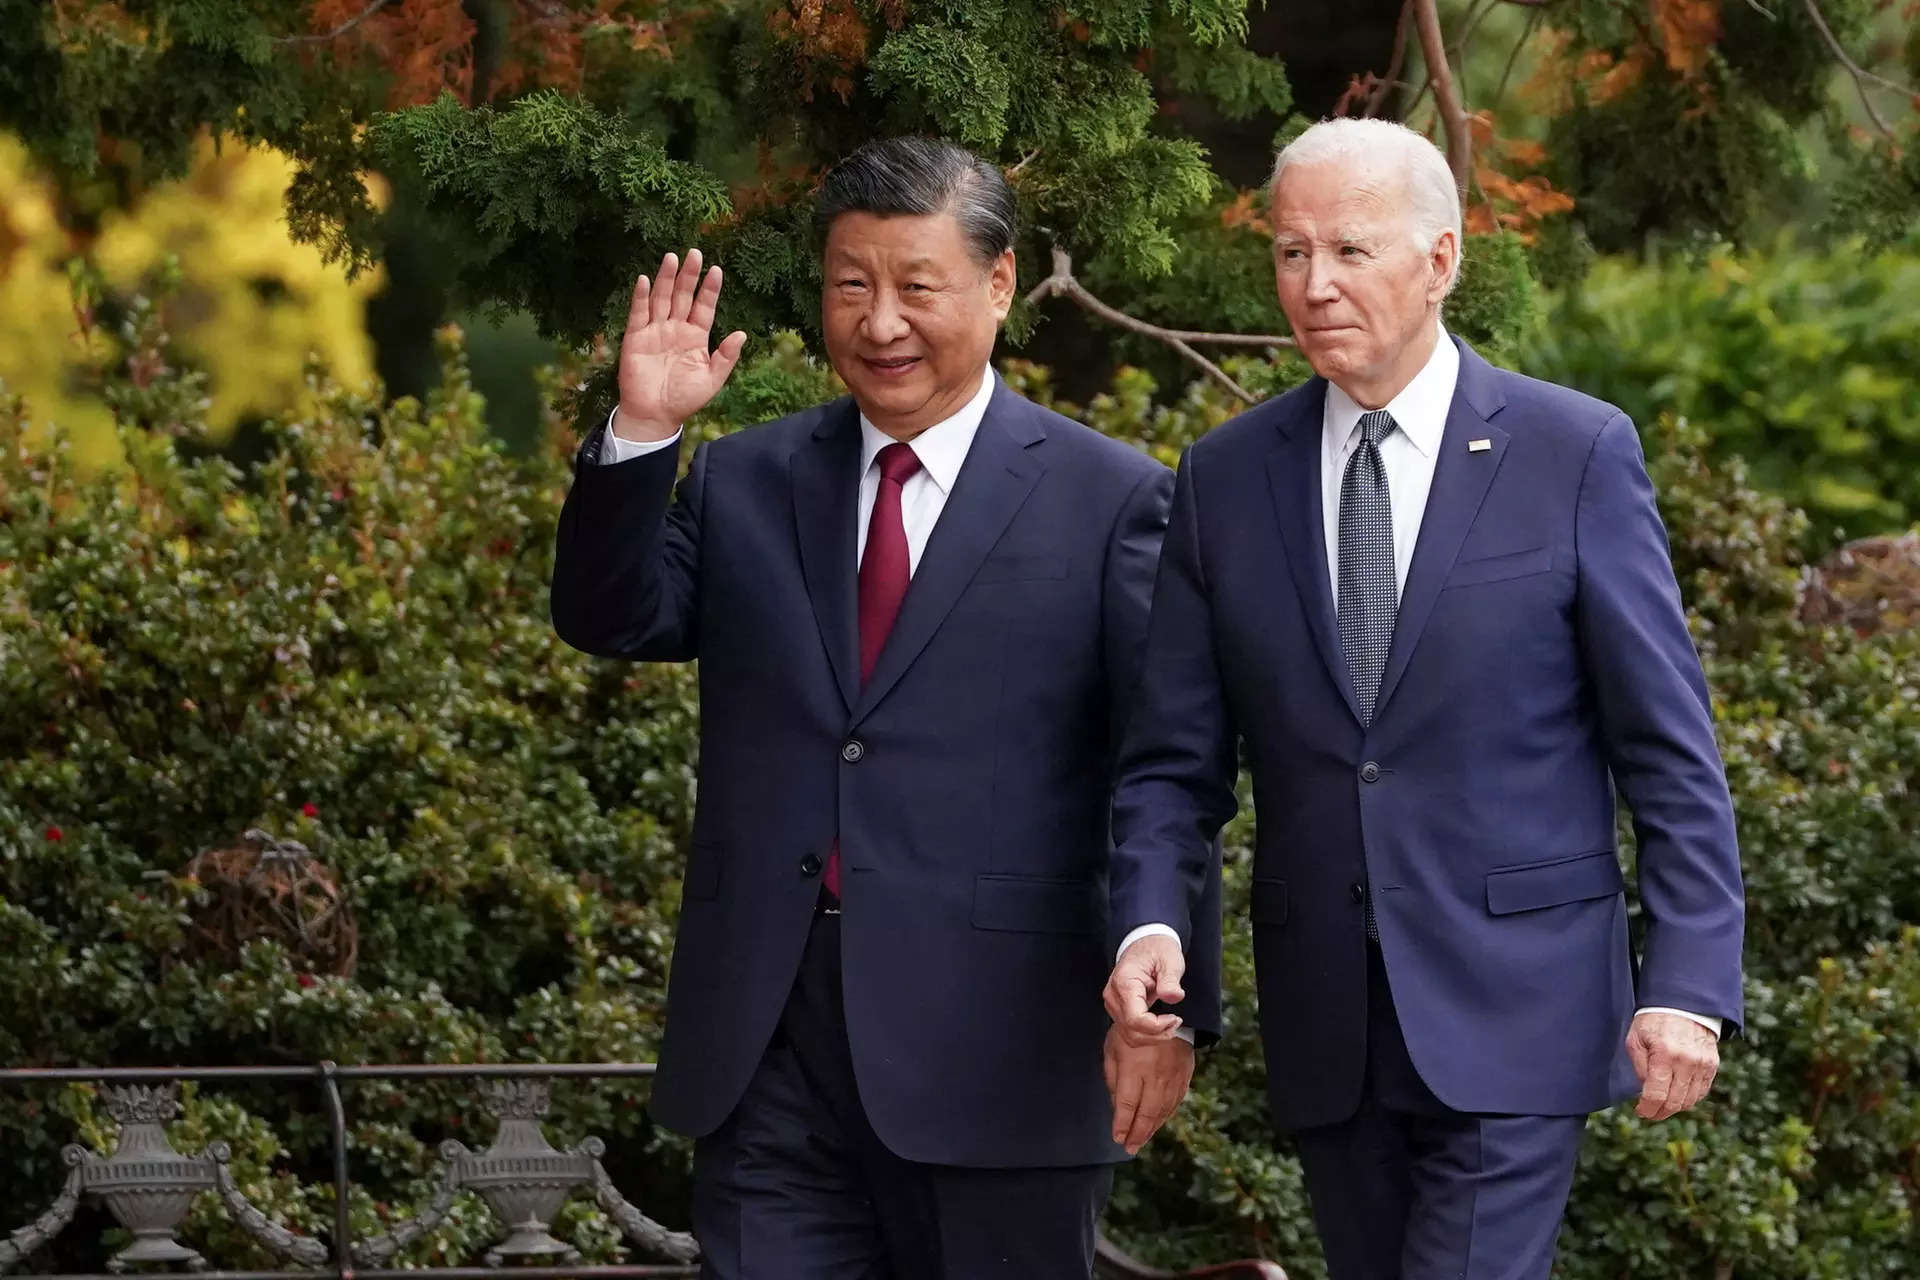 How does ' throwing eggs' help new investment in China? Executive order of Joe Biden gets sidelined 